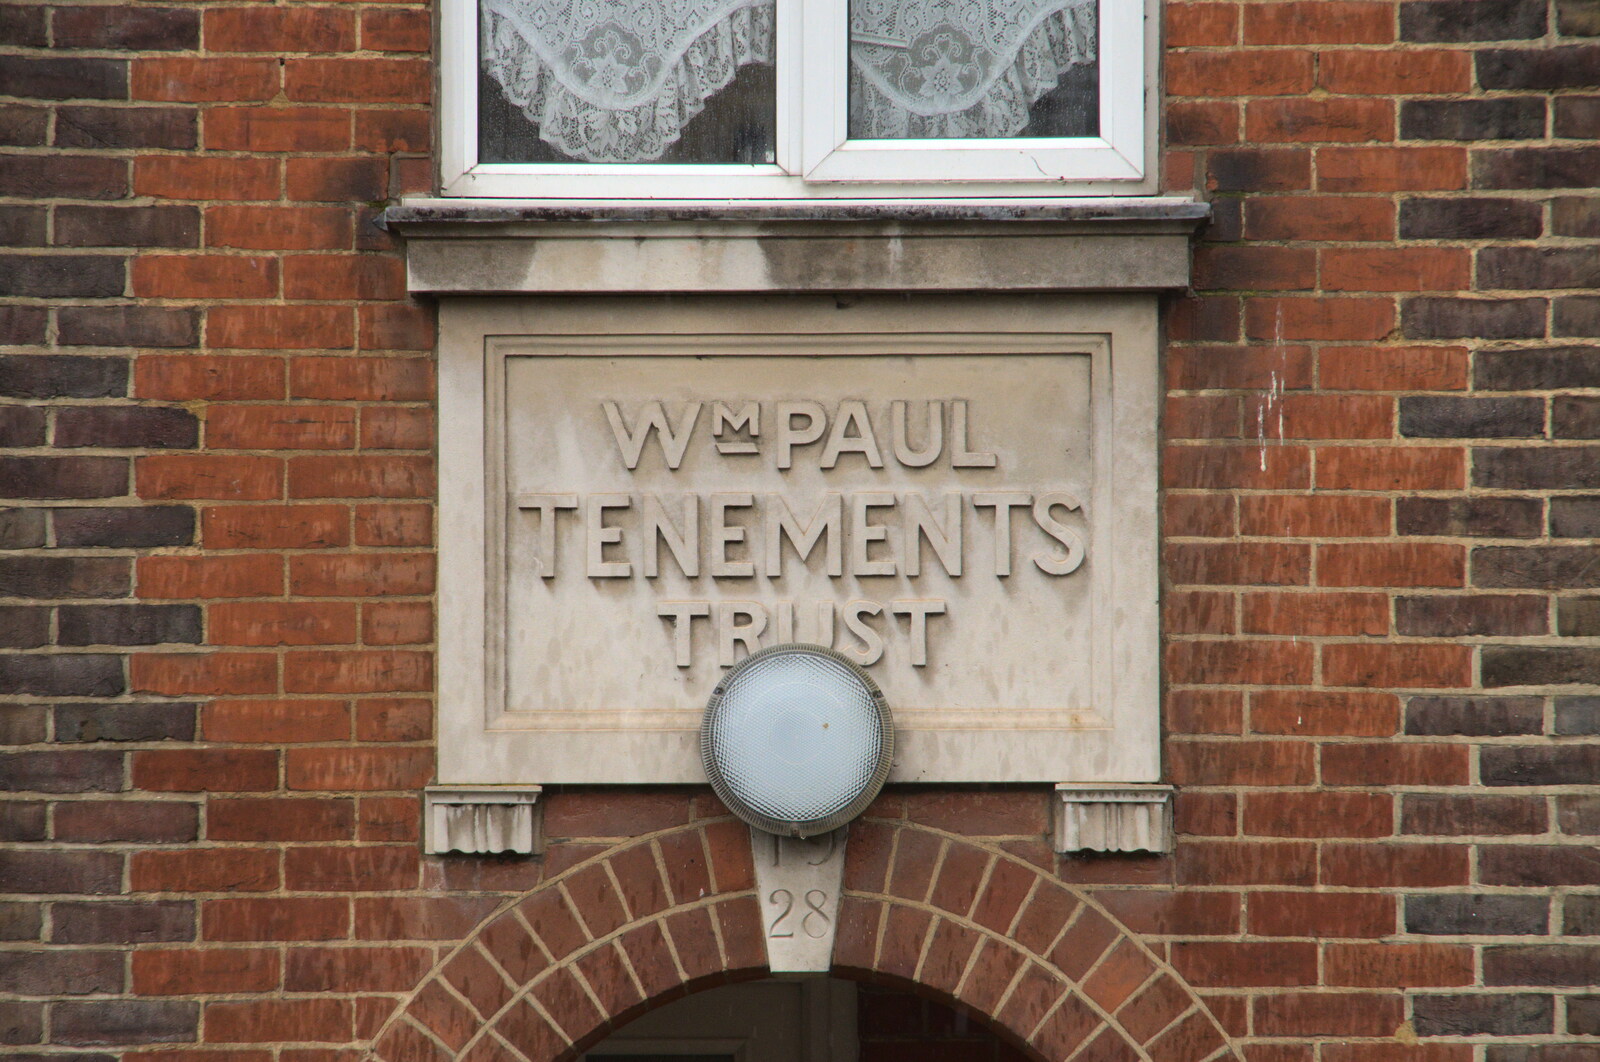 The 1928 William Paul Tenements Trust sign from Fred's Flute Exam, Ipswich, Suffolk - 5th March 2020